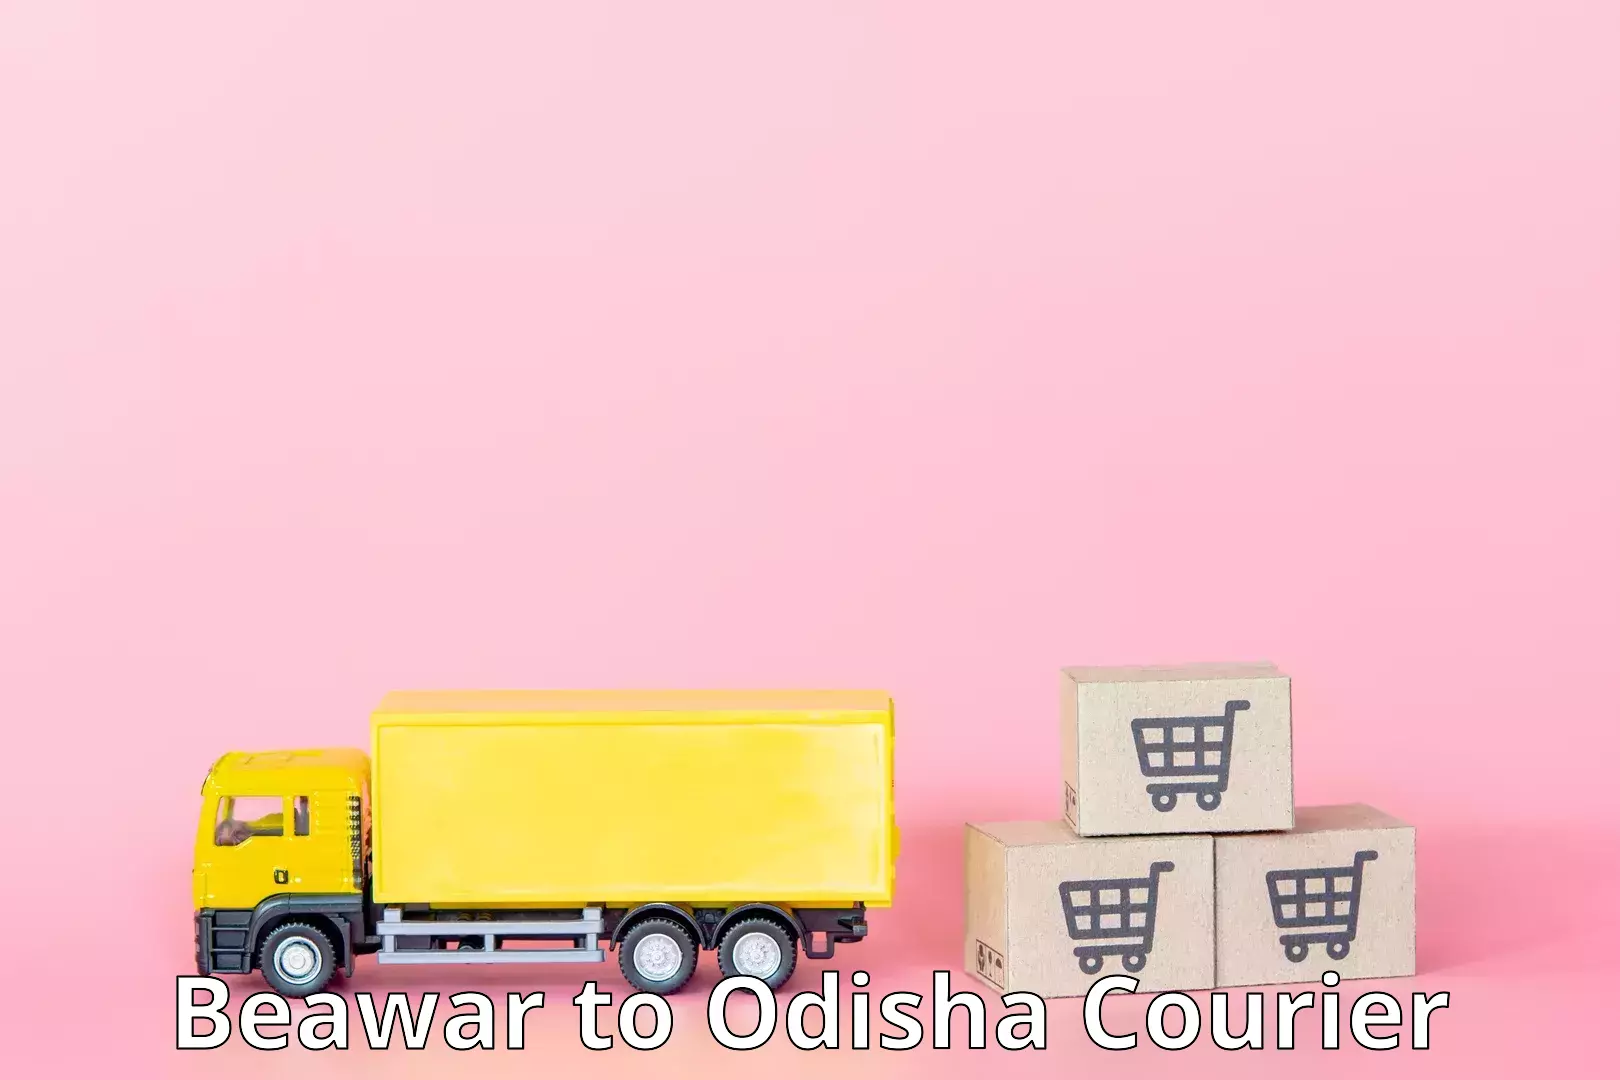 Express delivery capabilities Beawar to Odisha